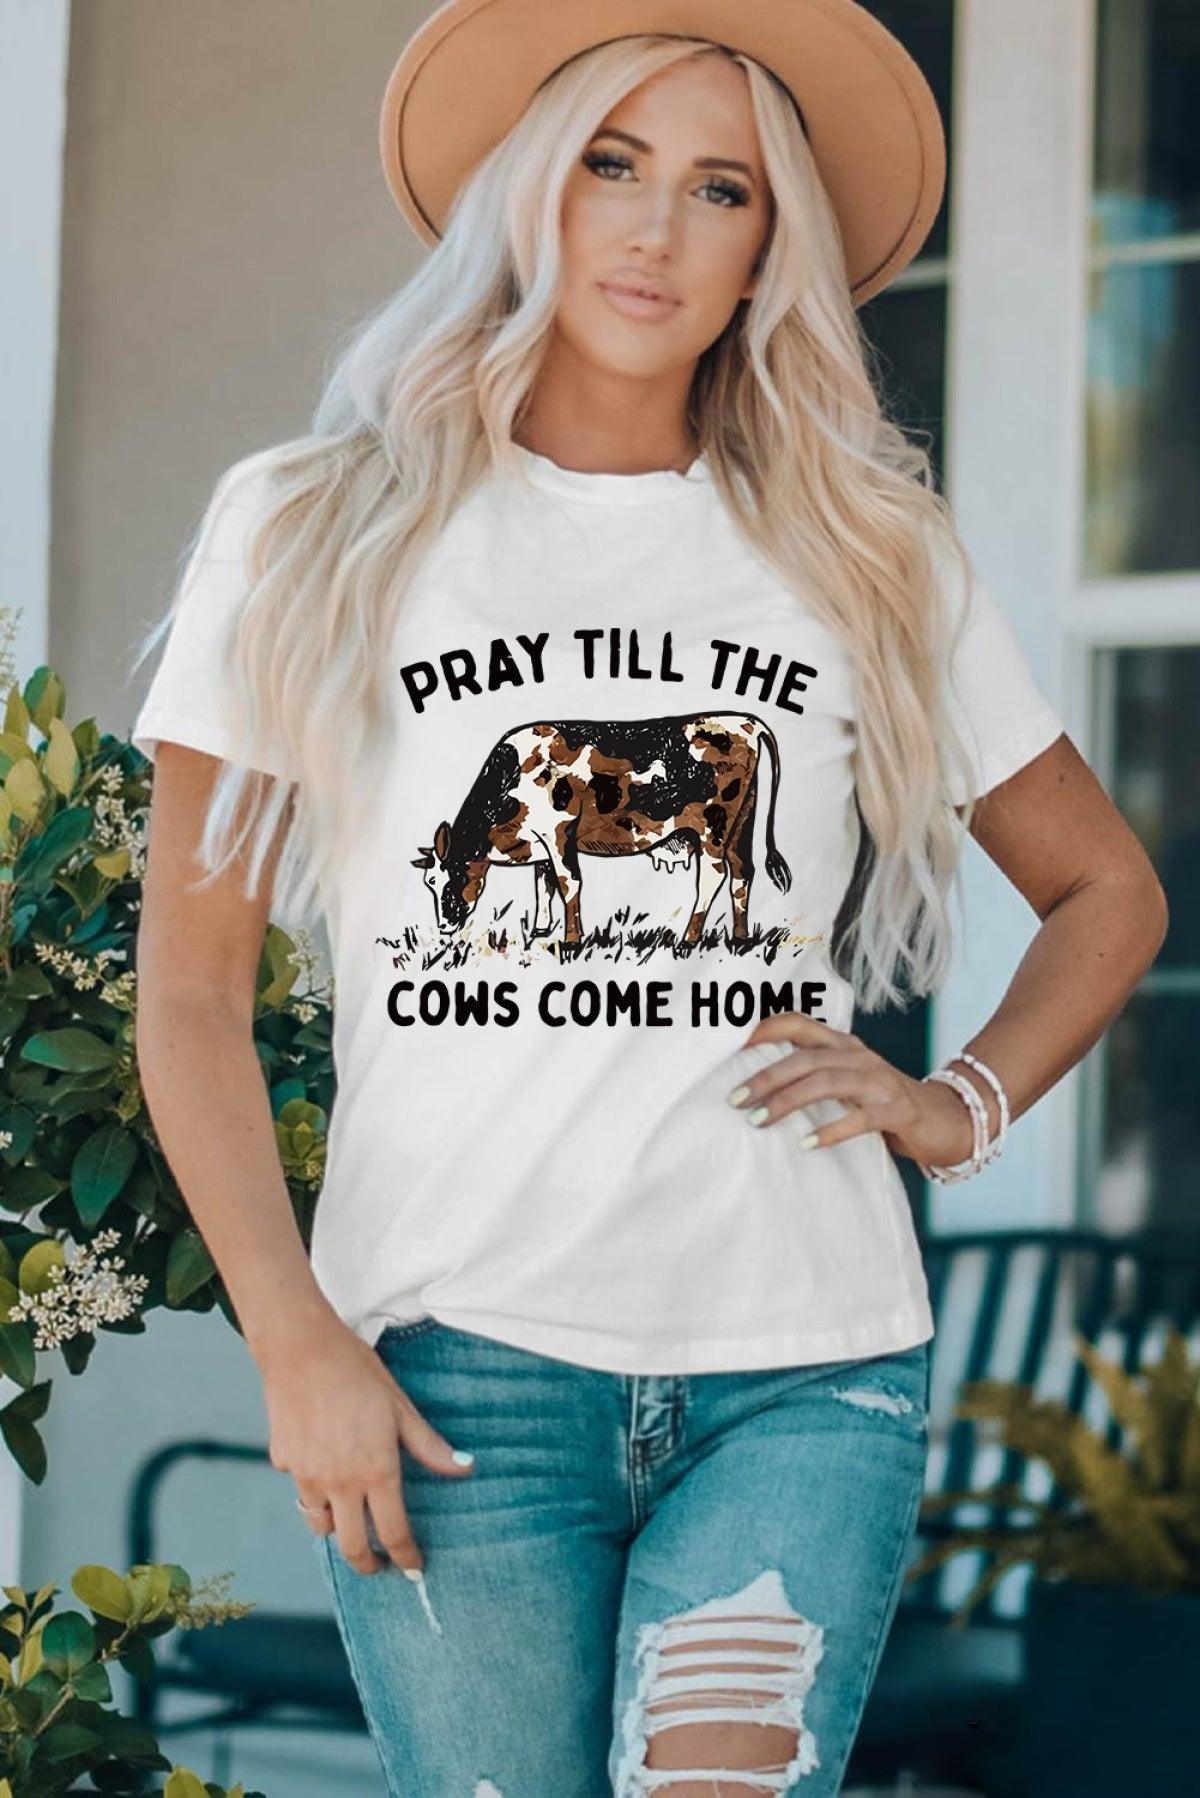 Get Your Pray Till The Cows Come Home Tee - Shop Now!